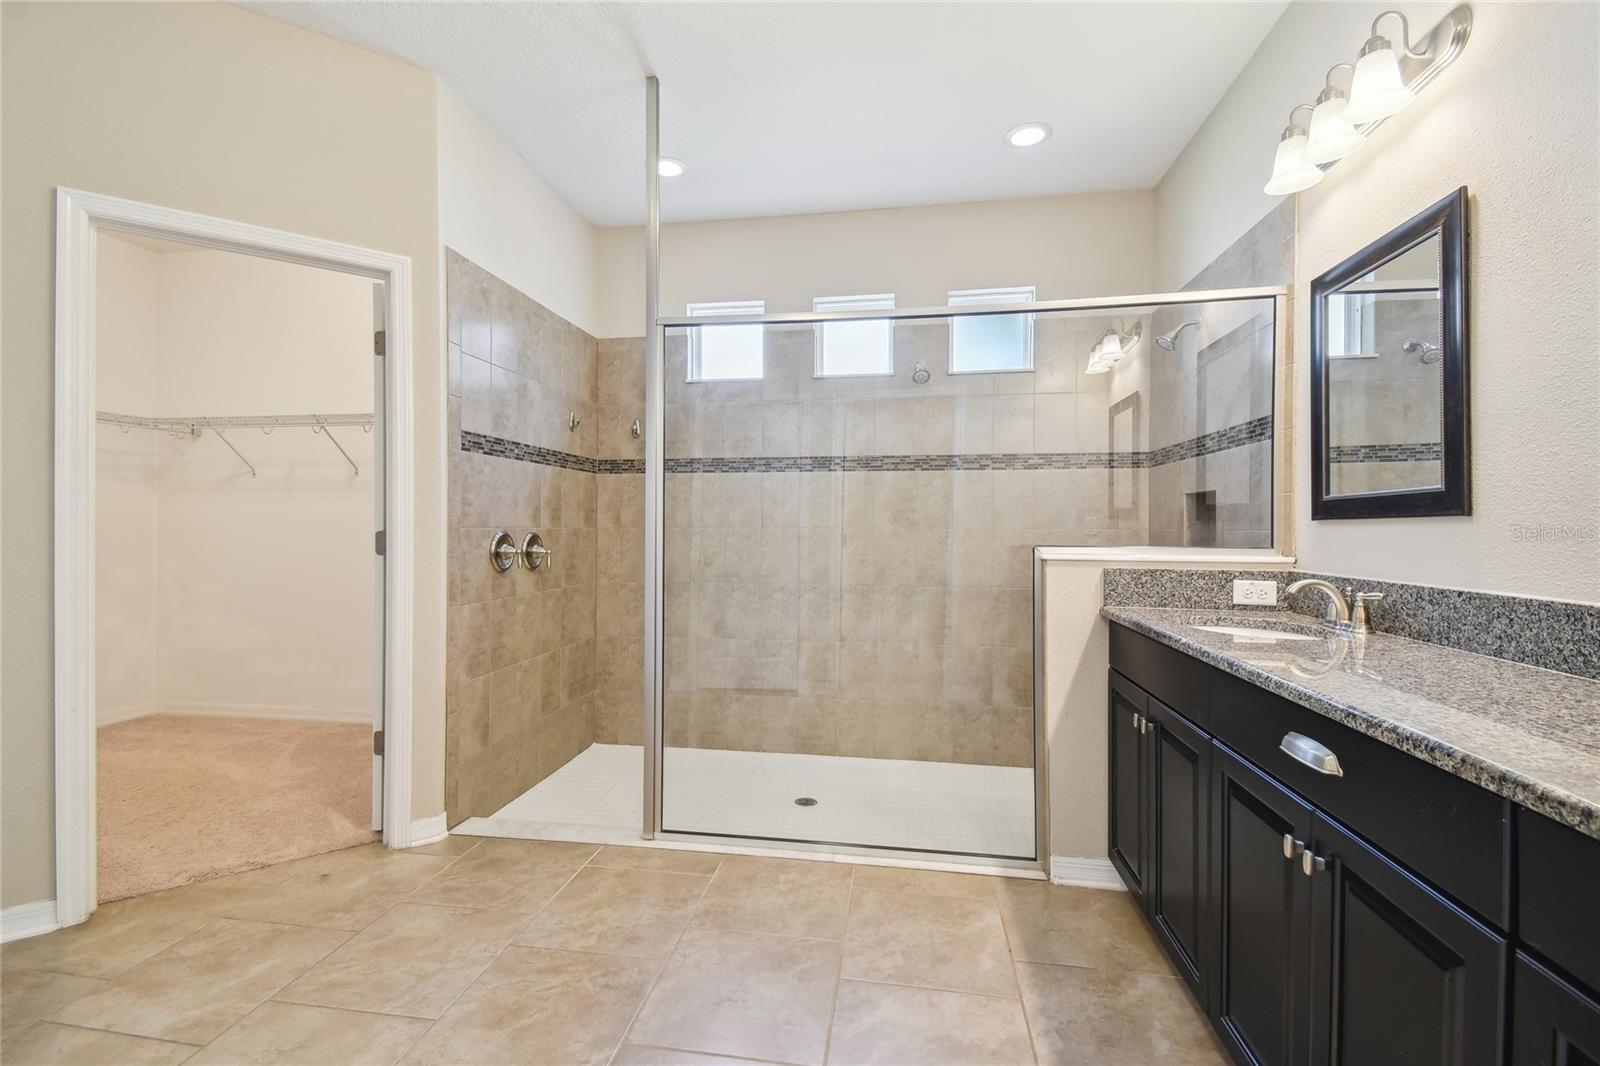 Master bathroom with entrance to walk-in closet